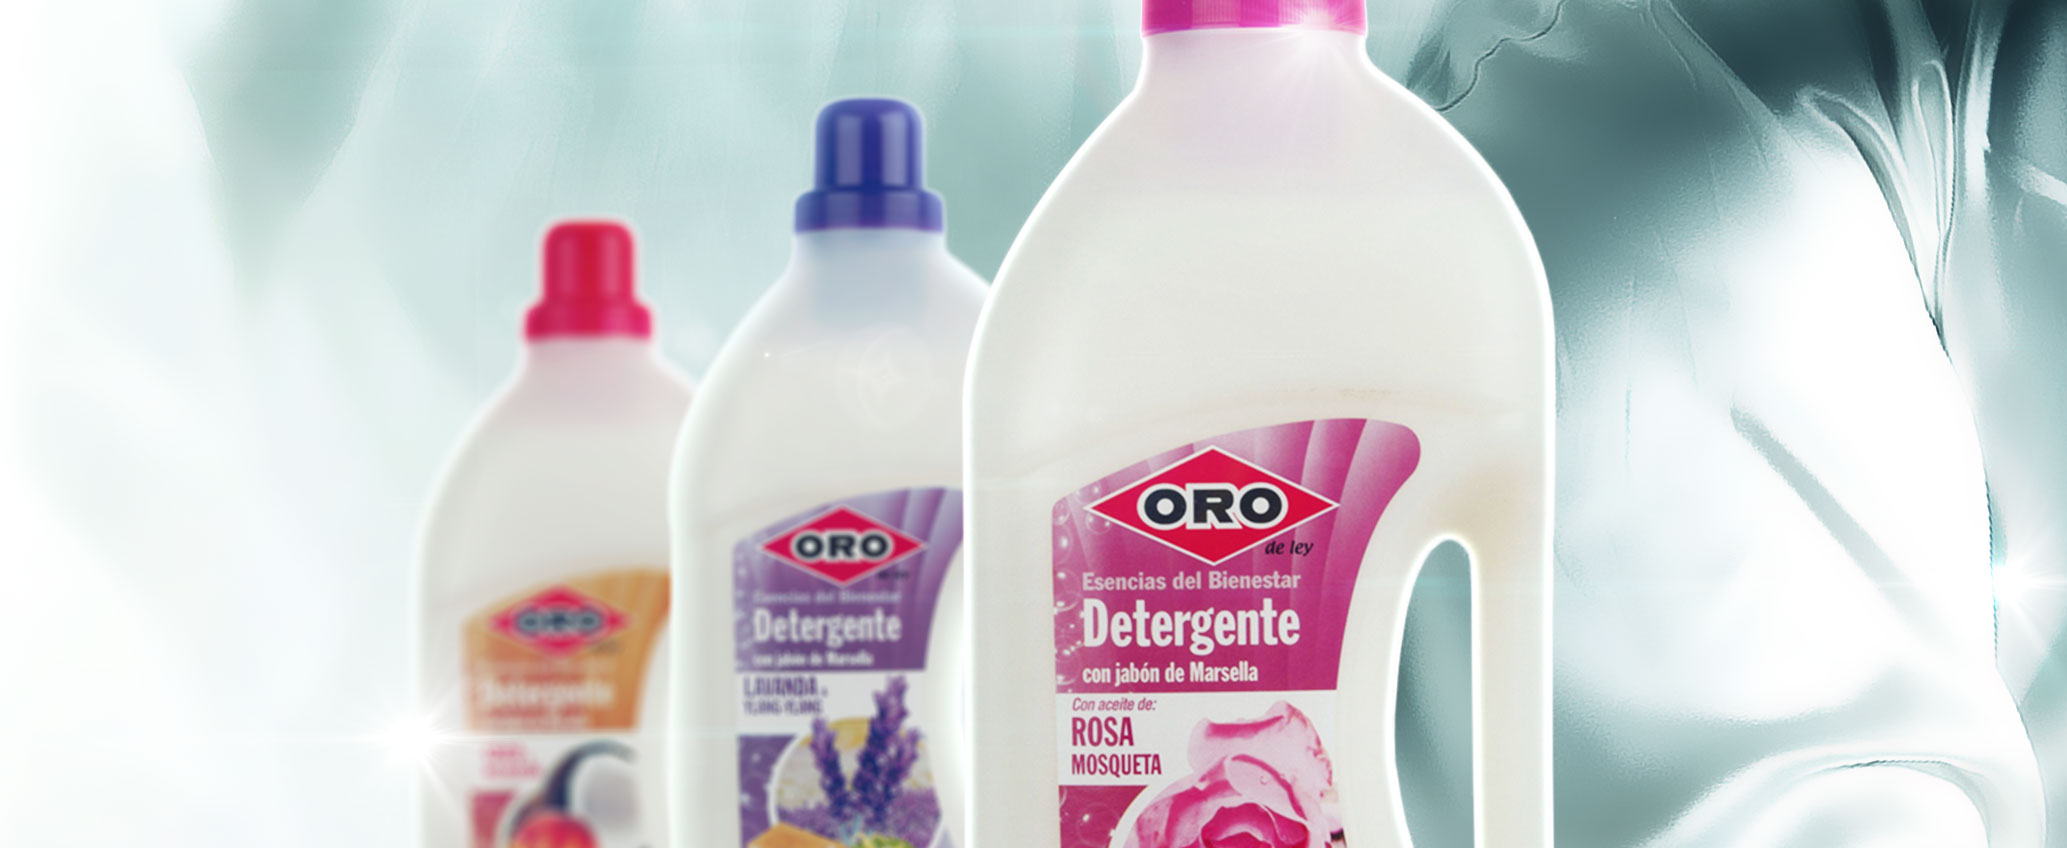 photo Proper use of detergents and disinfectants